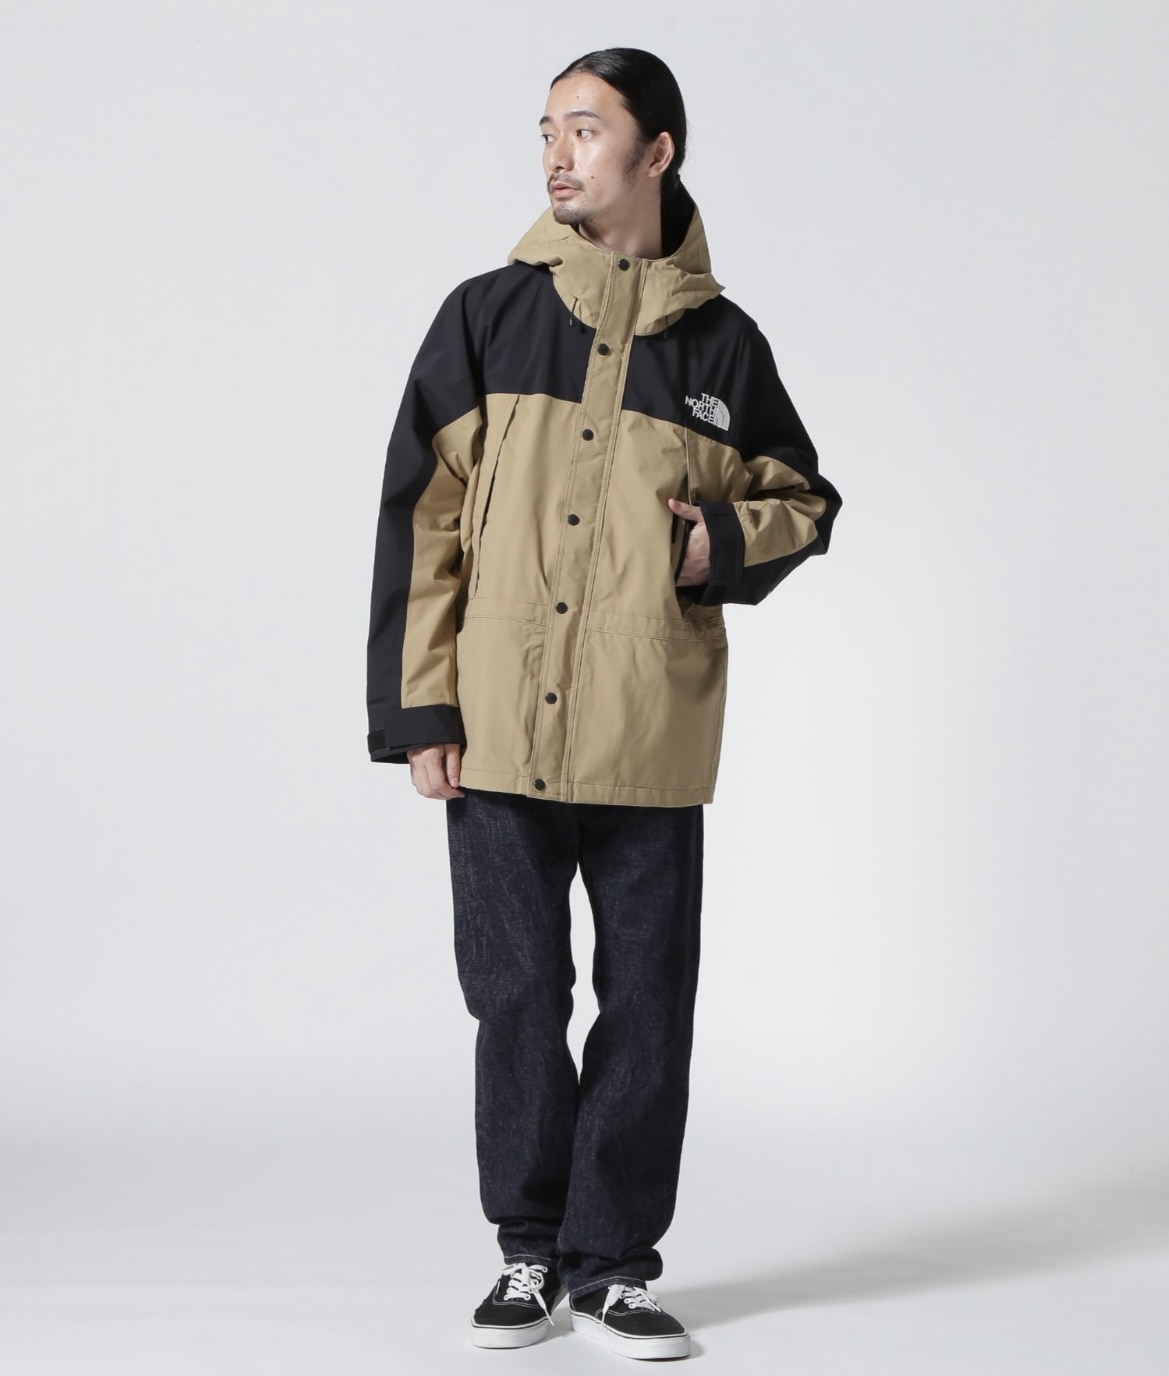 THE NORTH FACE Mountain Light Jaketでは購入させて頂きます